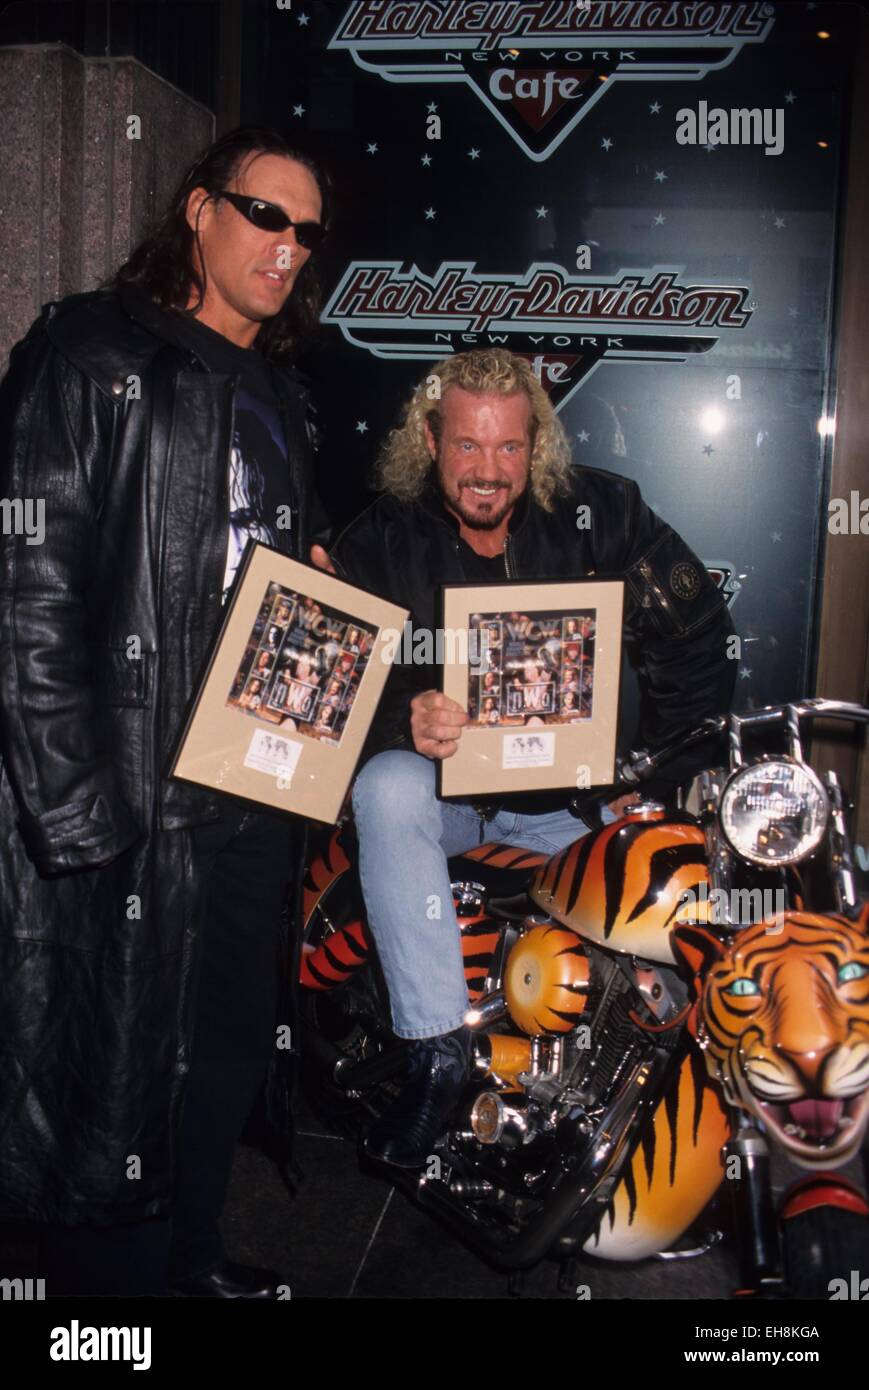 STING.Steve Borden with Diamond Dallas Page.WCW Wrestlers honored with pastage stamp series at Harley Davidson Cafe in New York 1999.k14715ww. © Walter Weissman/Globe Photos/ZUMA Wire/Alamy Live News Stock Photo